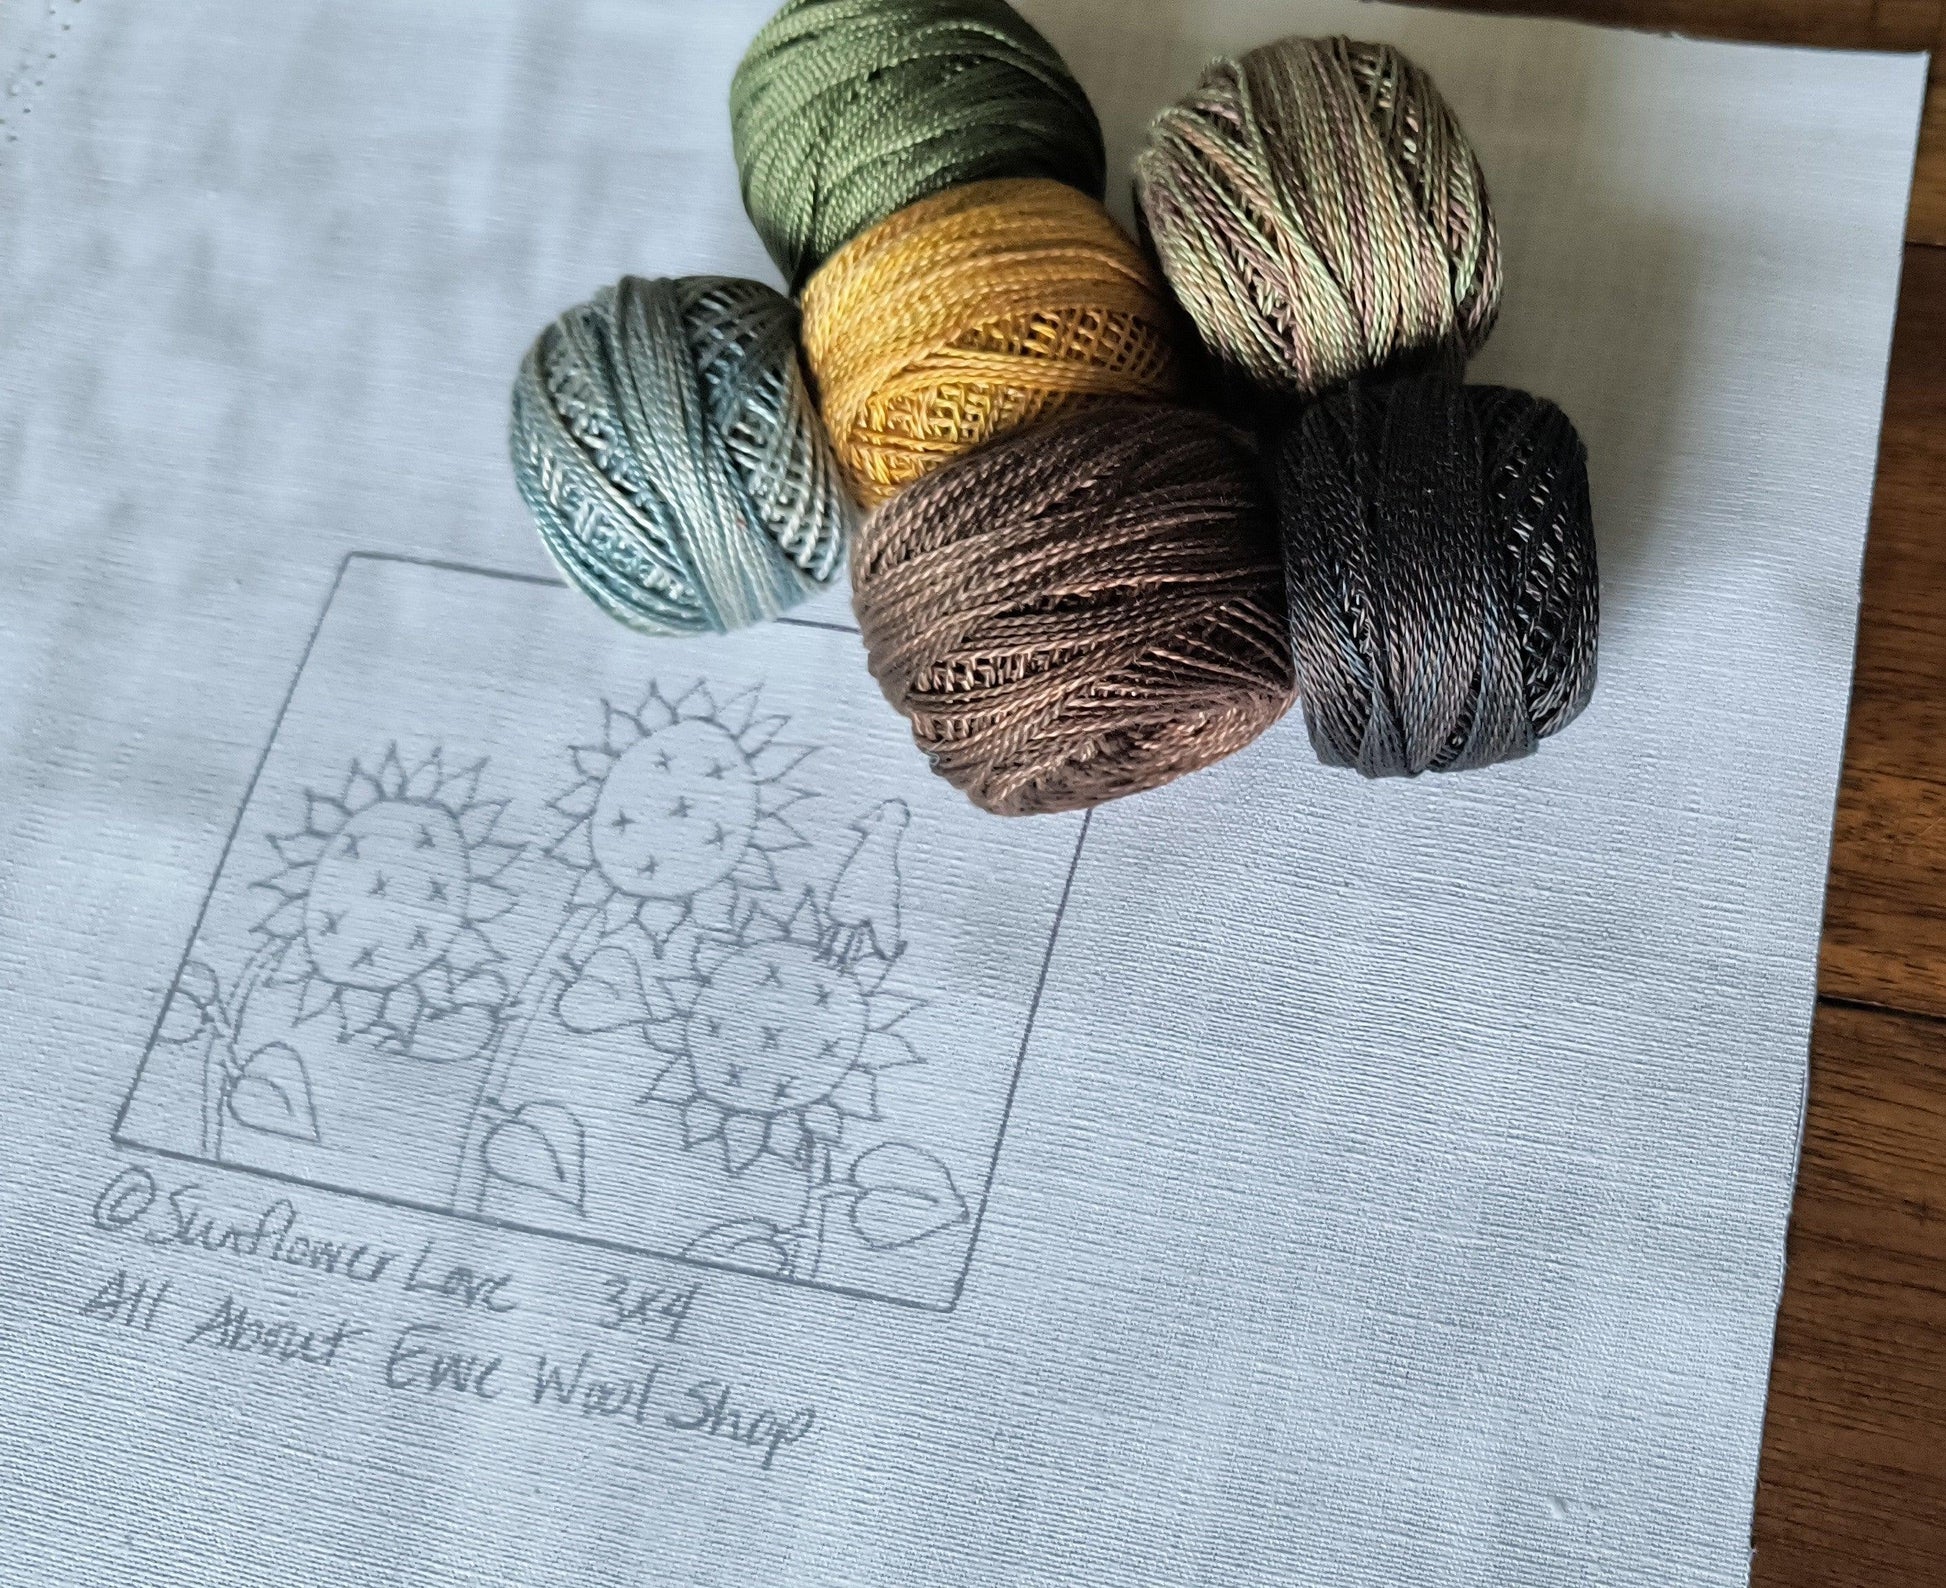 SUNFLOWER LOVE Kit - All About Ewe Wool Shop